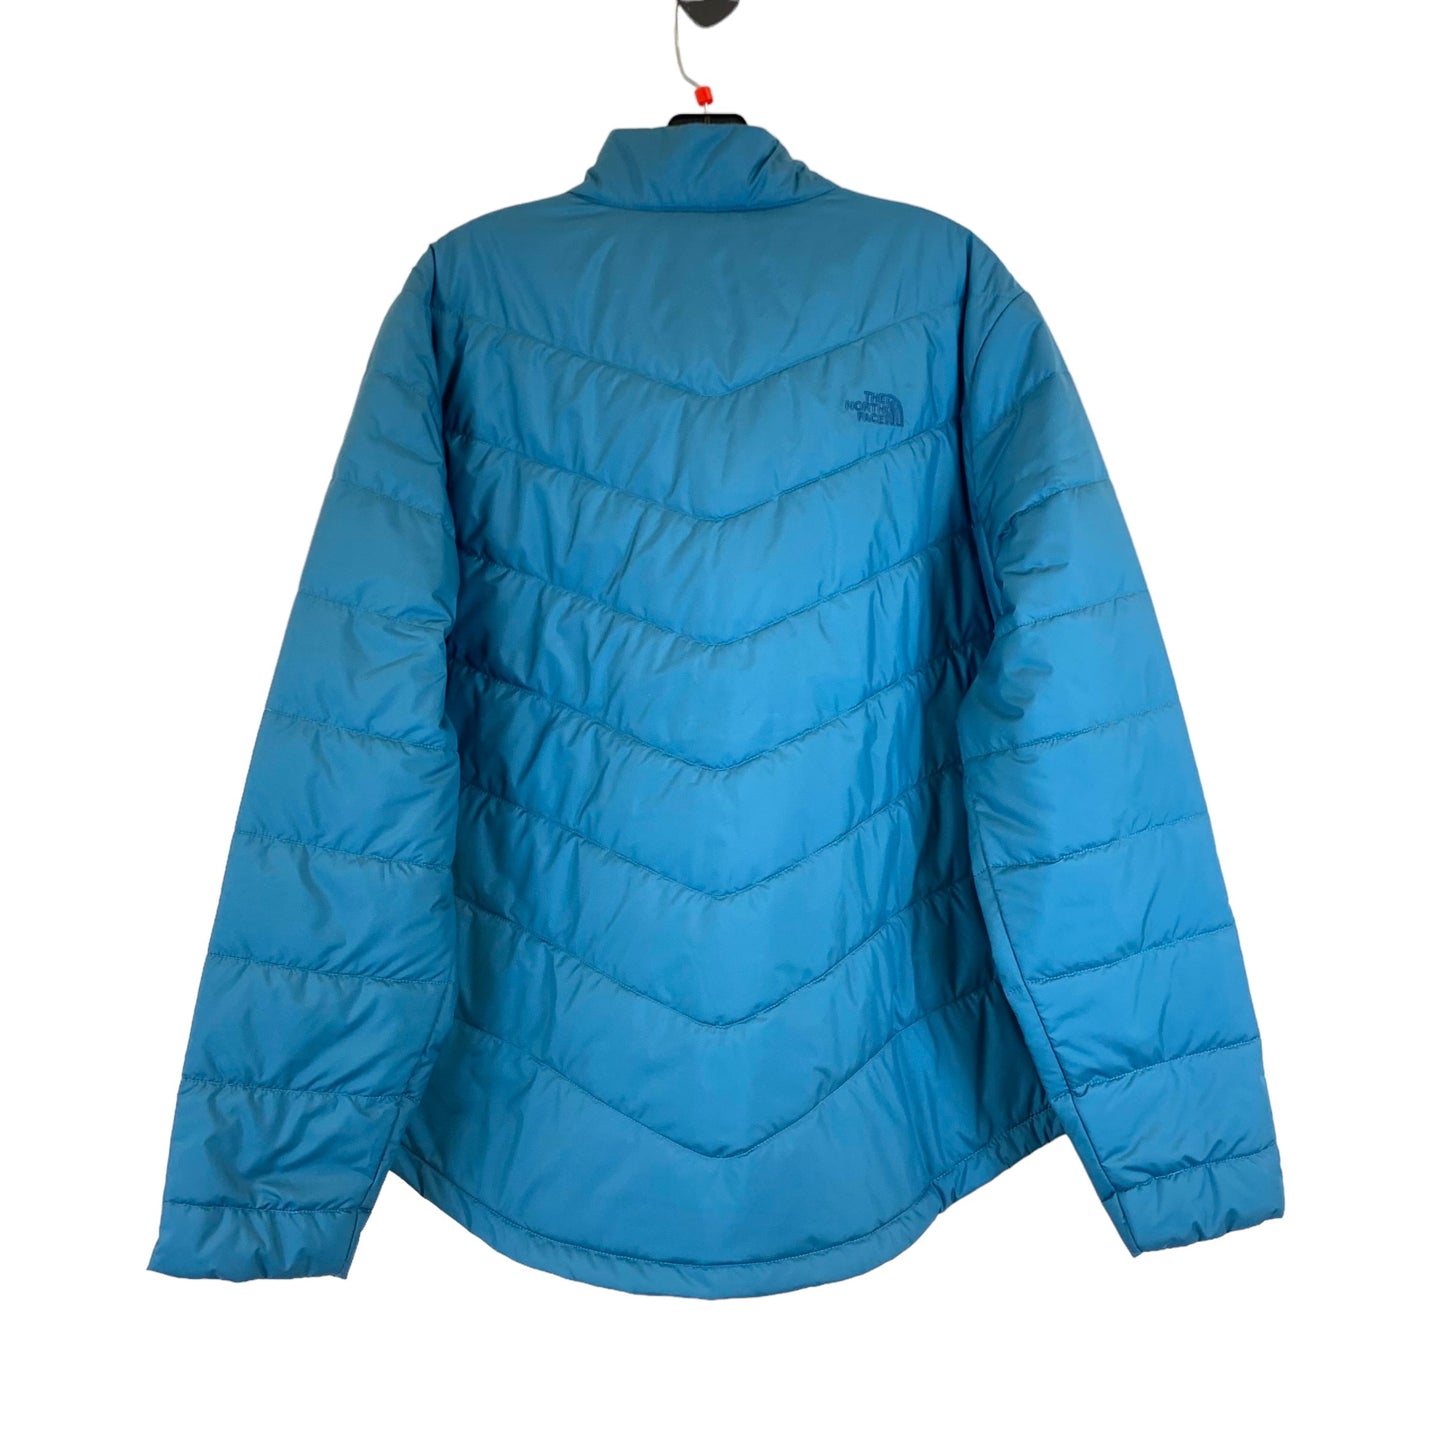 Blue Jacket Puffer & Quilted The North Face, Size Xxl